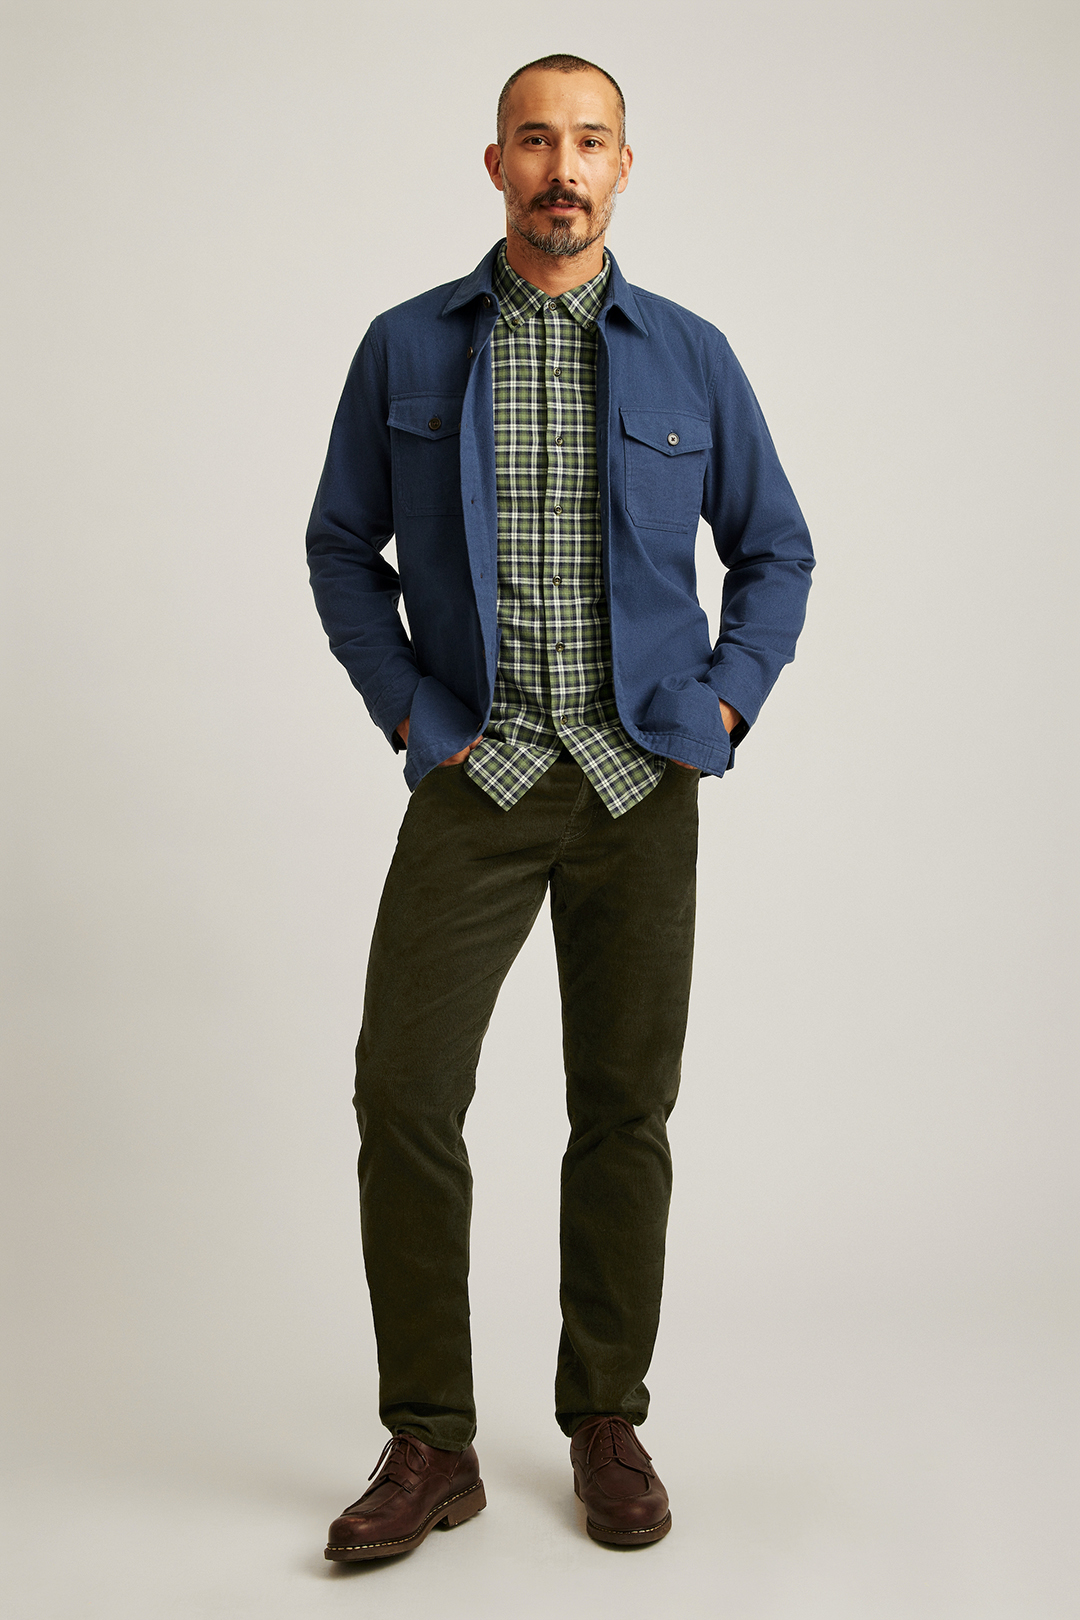 Blue overshirt, green plaid shirt, green corduroy jeans, and brown casual boots outfit